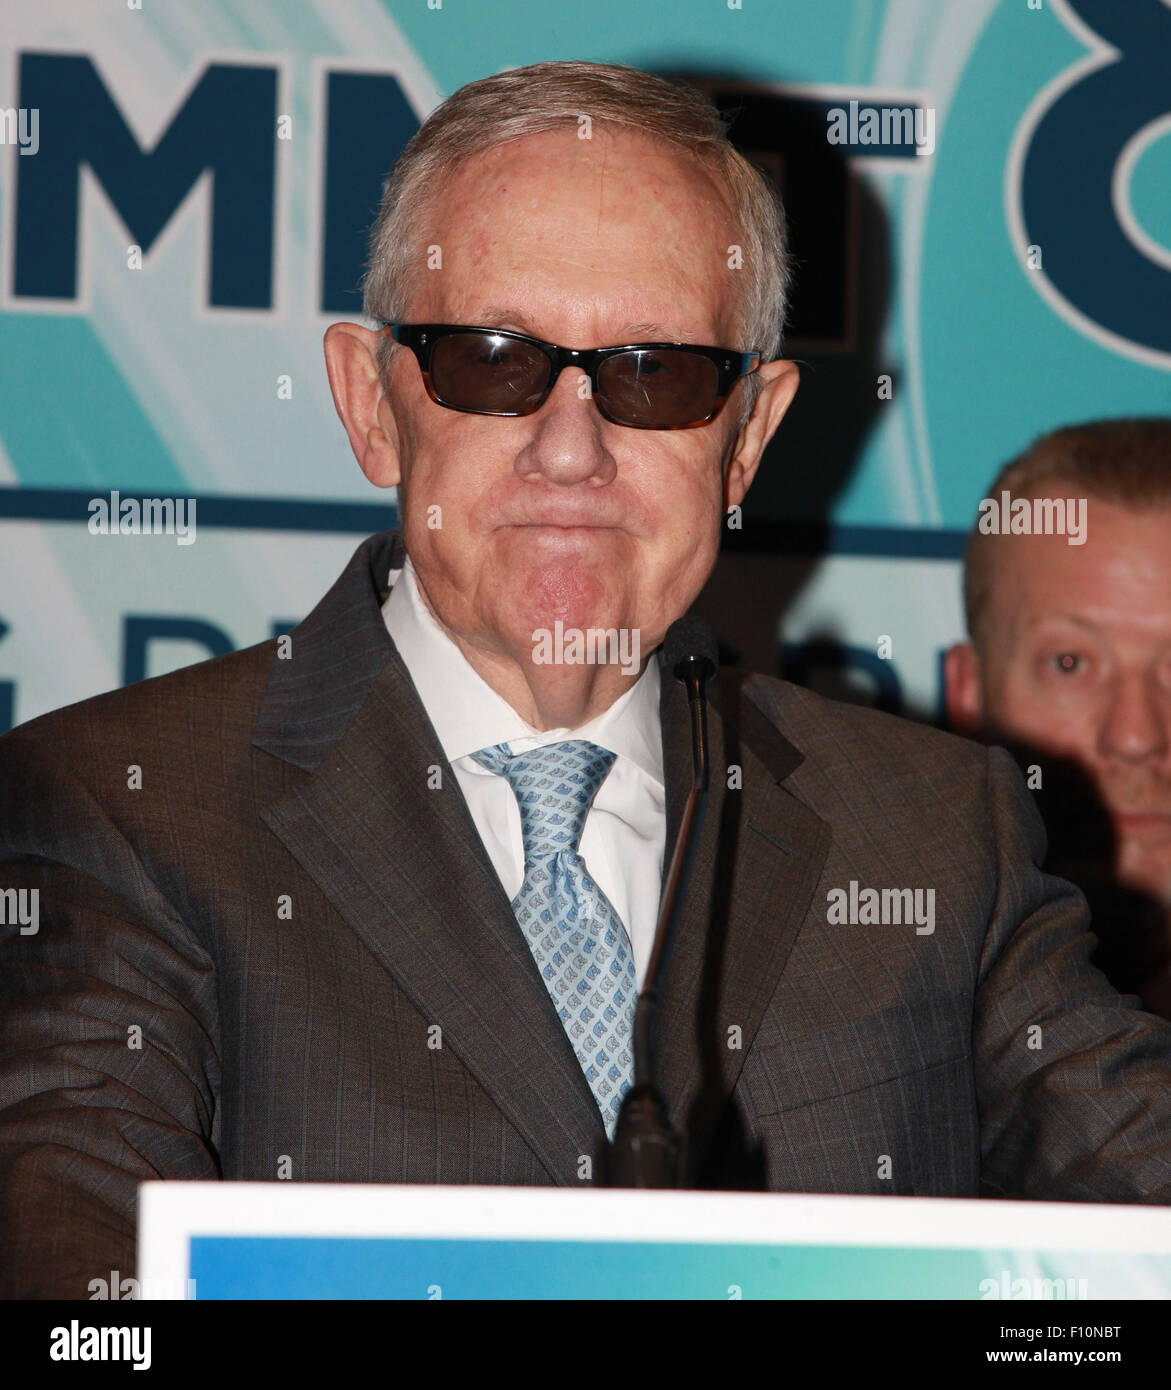 Aug. 24, 2015 - Las Vegas, Nevada, United States of America - Senator Harry Reid (D, NV) speaks at  Valley ElectriC Association press conference  during the 2015 National Clean Energy Summit 8.0 on August 24, 2015  at Mandalay Bay Convention Center in Las Vegas, Nevada. (Credit Image: © Marcel Thomas via ZUMA Wire) Stock Photo